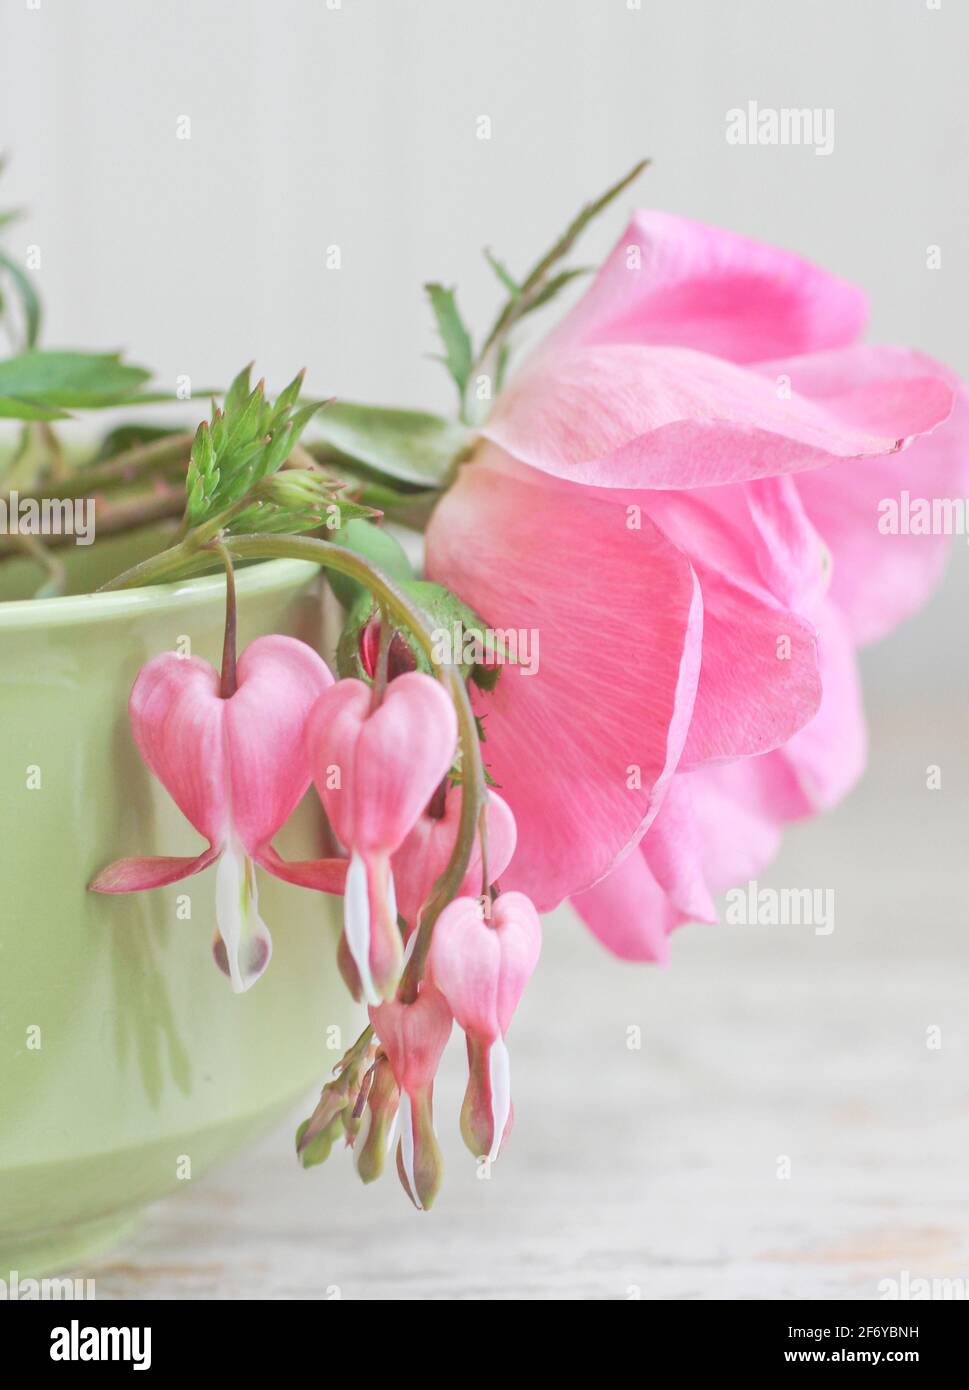 Wild pink rose with bleeding hearts flowers in vintage tea cup still life Stock Photo